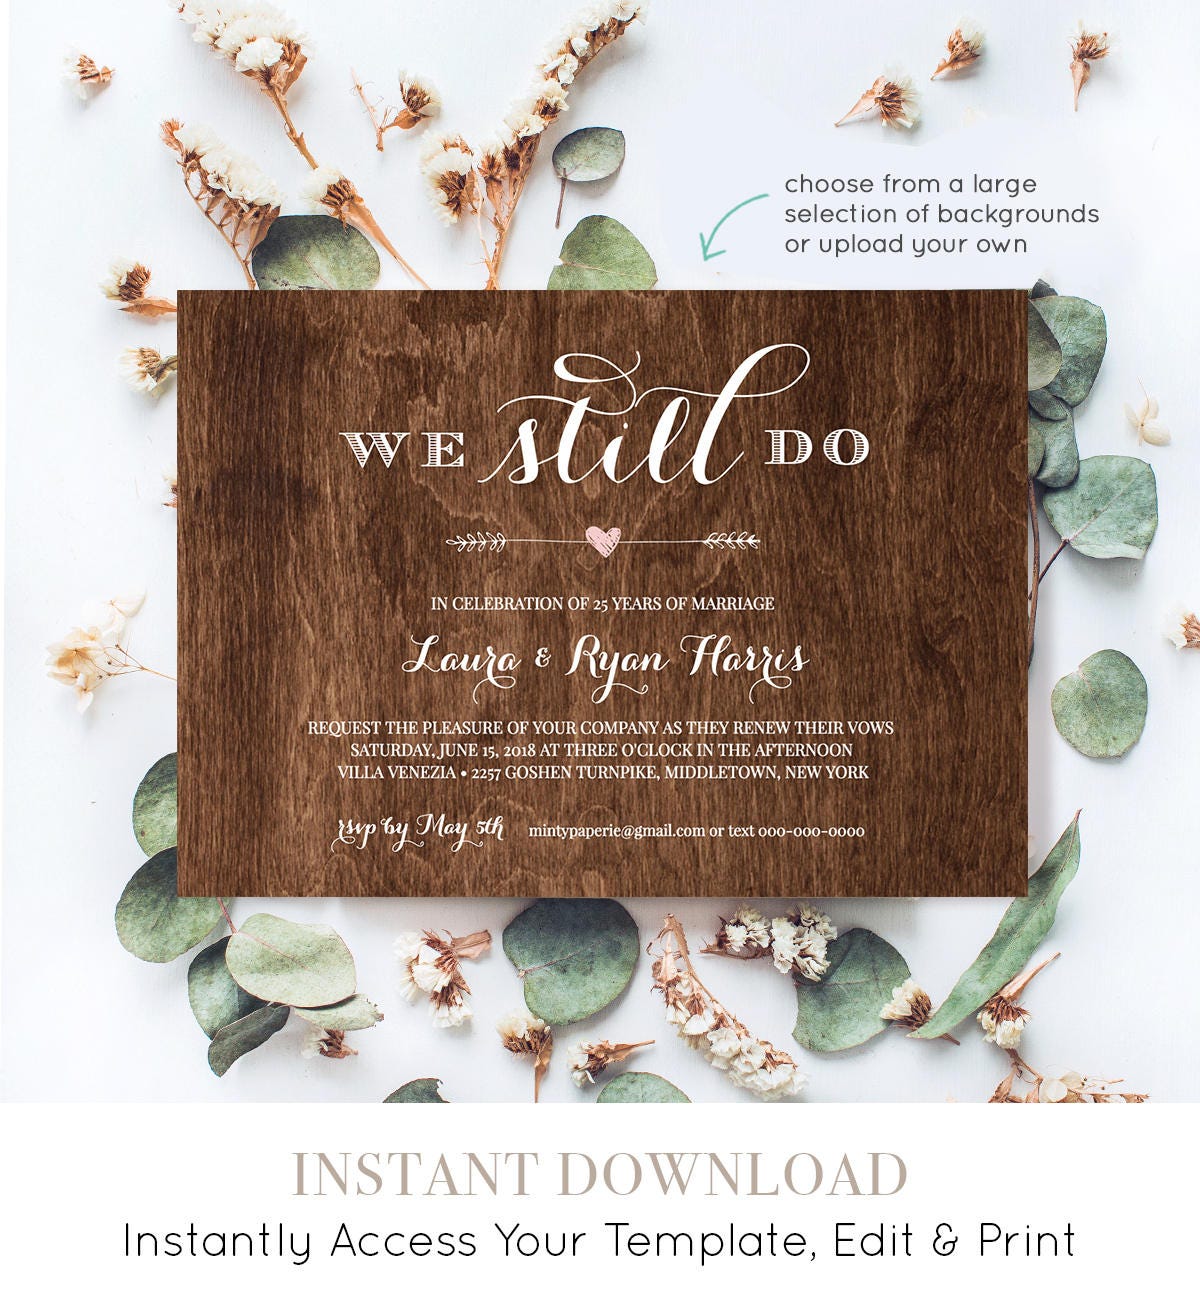 Vow Renewal Invitation Template, We Still Do, Instant Download, Wedding